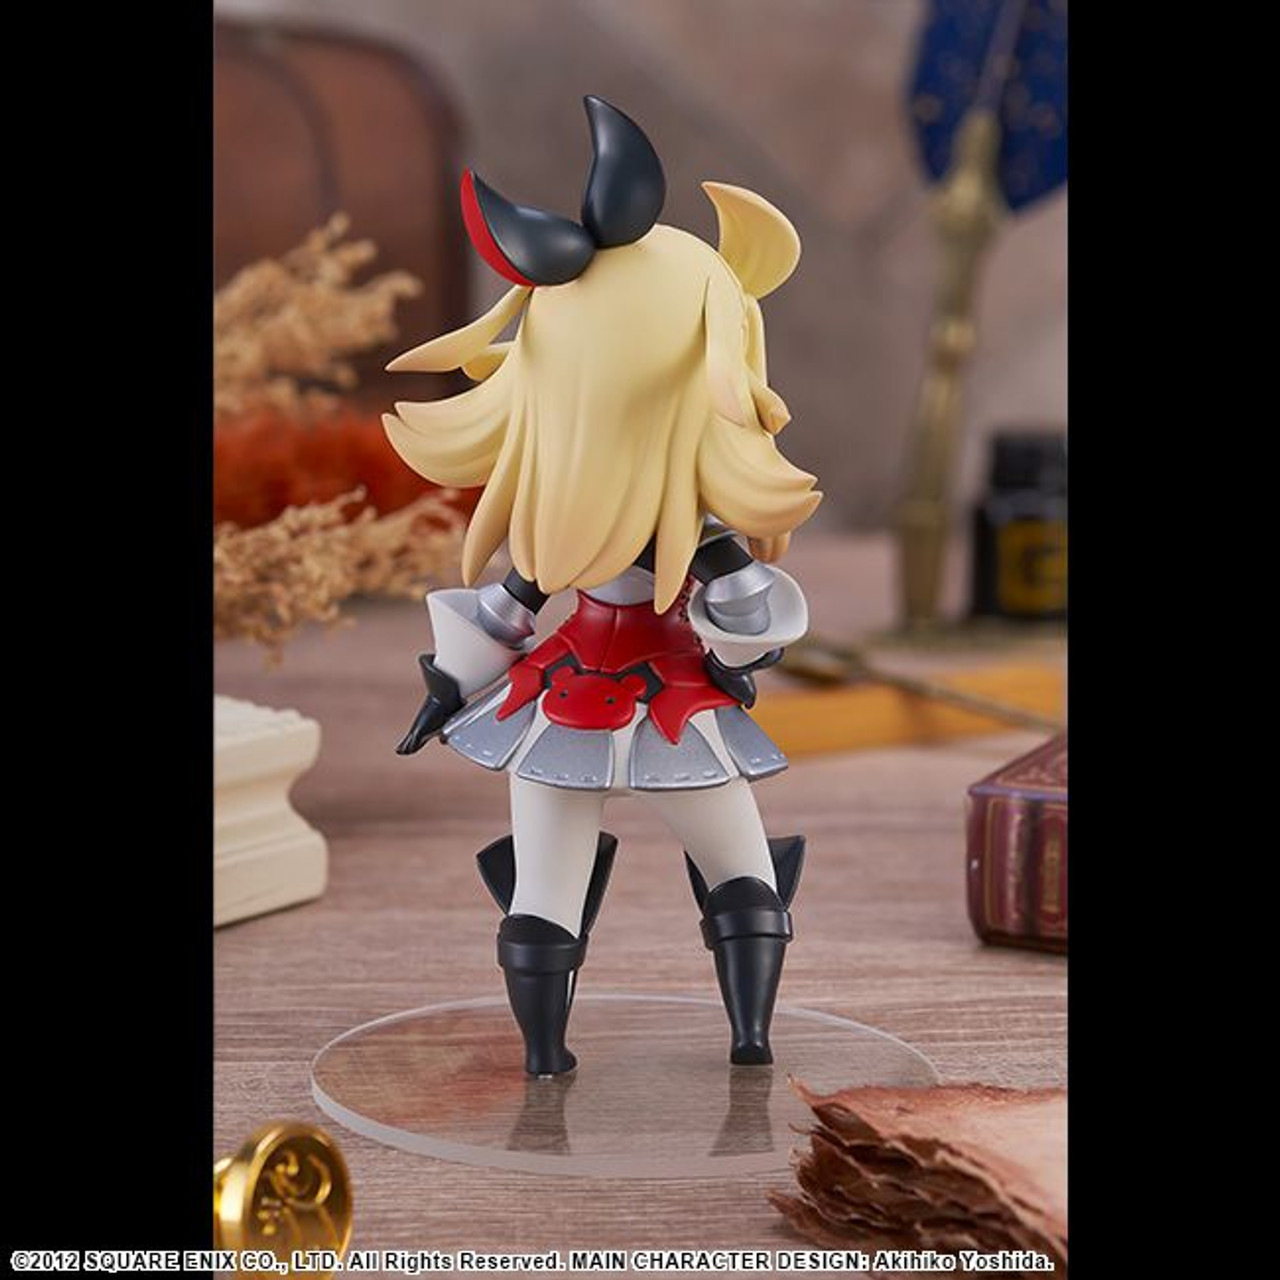 From the hit game series, BRAVELY DEFAULT comes a new #PopUpParade